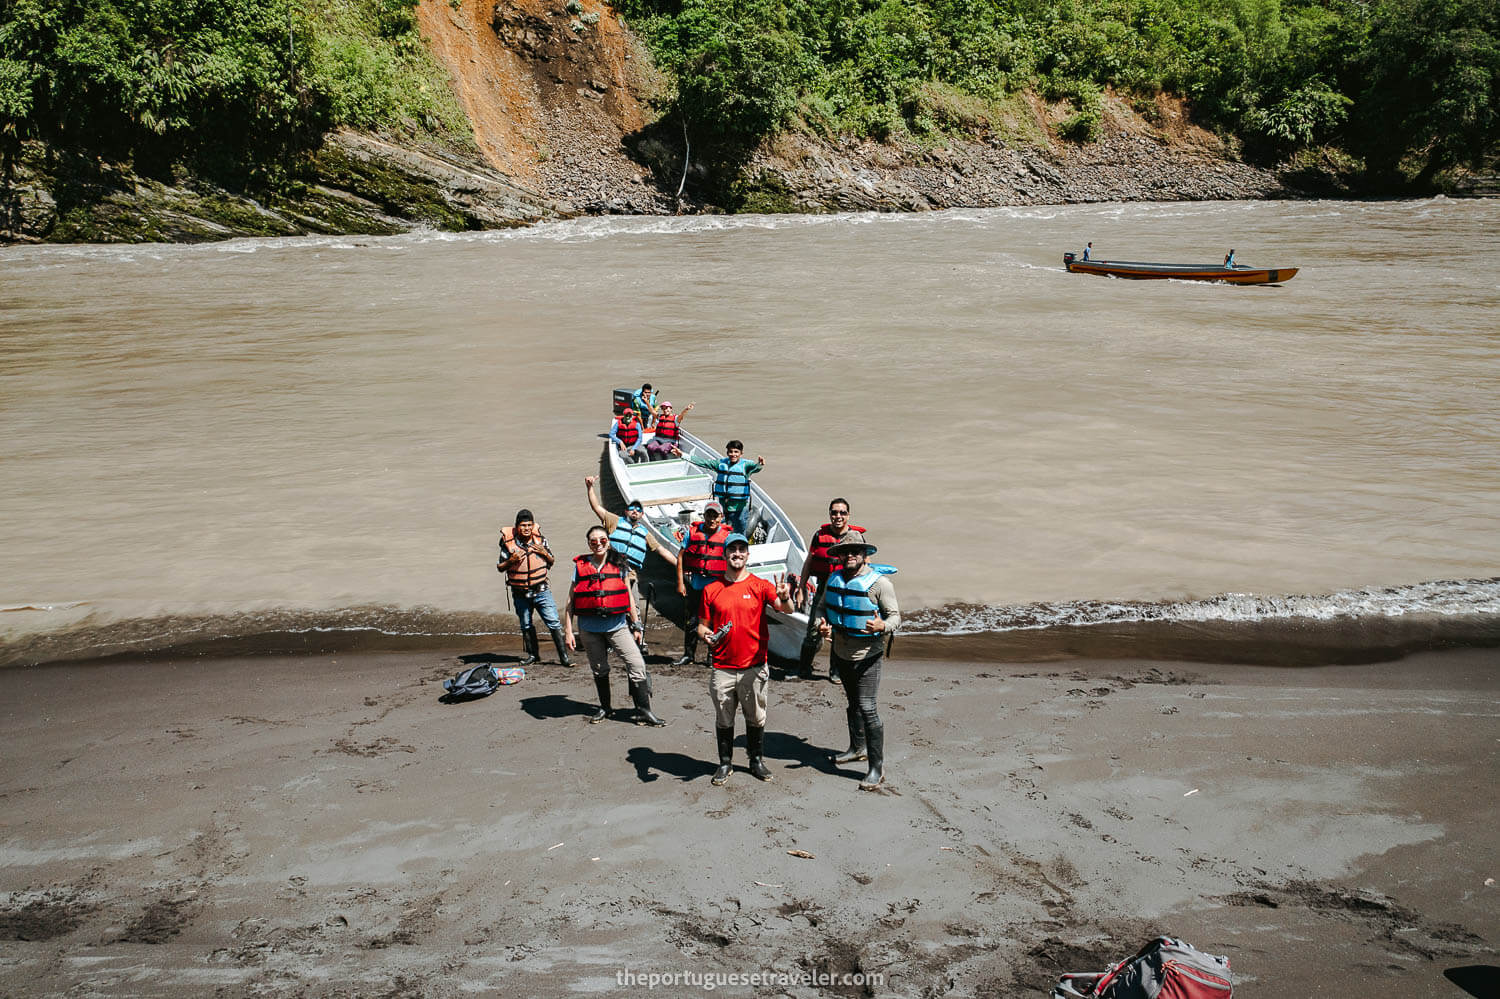 The entire group almost departing by boat through the Amazon Jungle, on the Cueva de Los Tayos expedition.